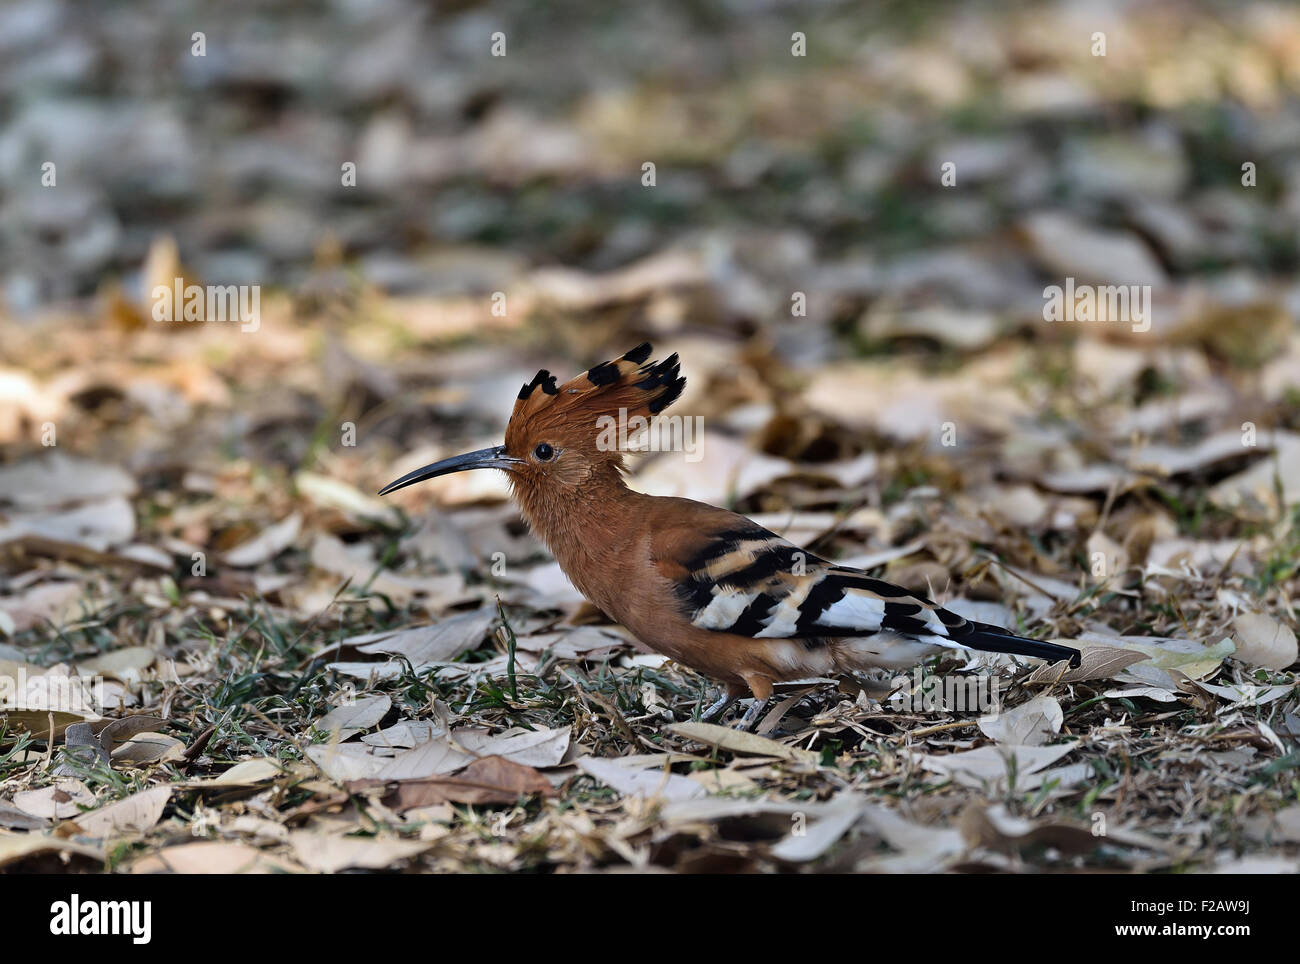 South Africa, Kruger district,  African Hoopoe, Upupa africana Stock Photo